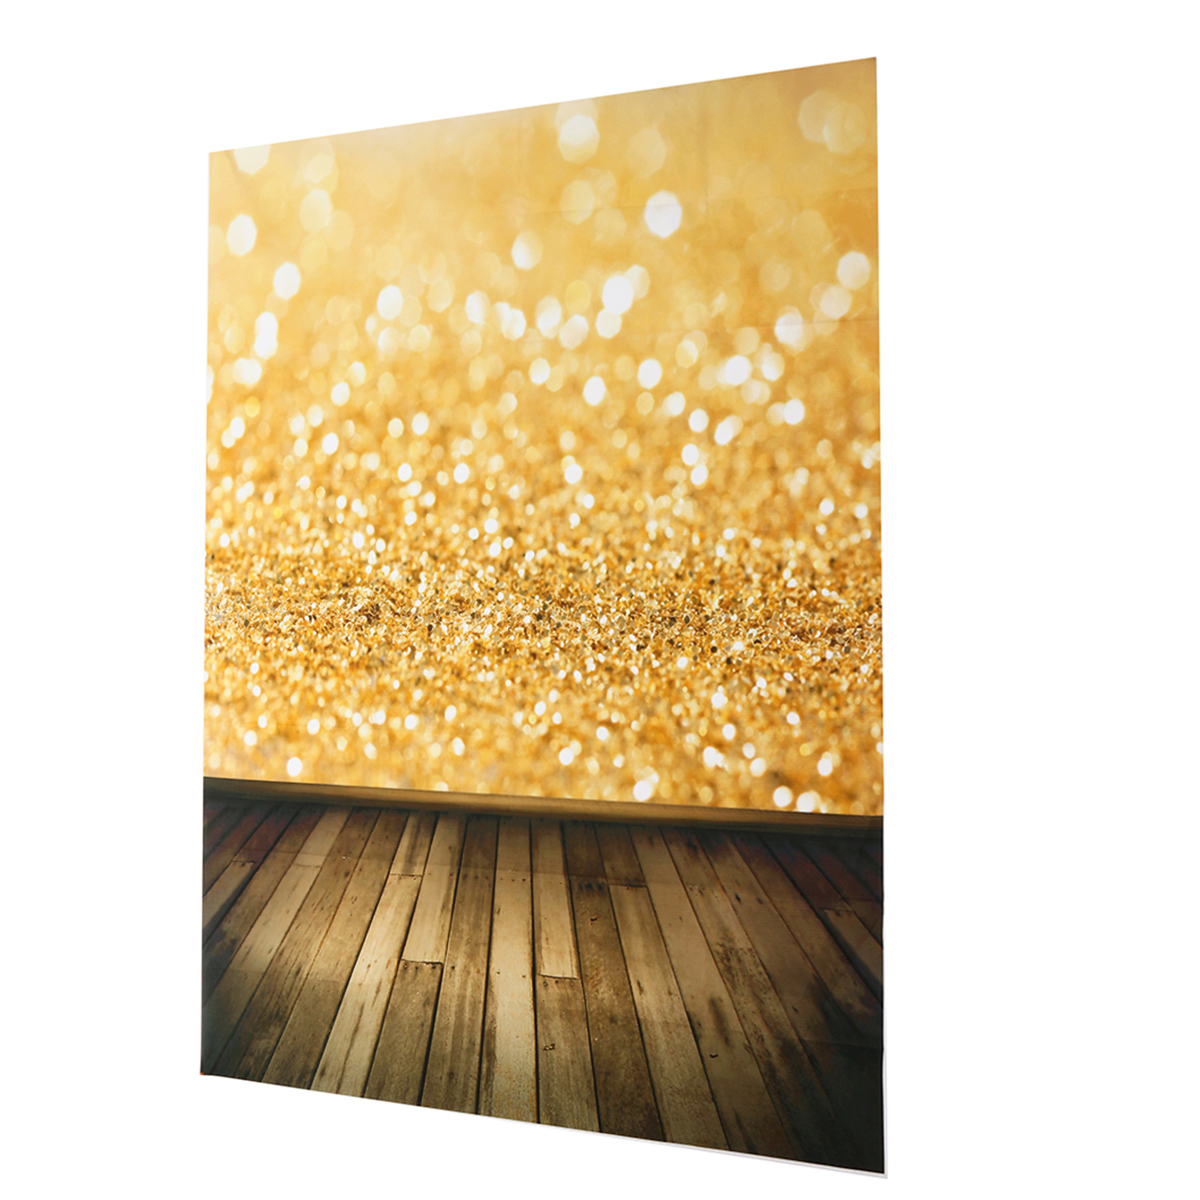 Find 5x7FT Vinyl Gold Glitter Wood Floor Photography Backdrop Background Studio Prop for Sale on Gipsybee.com with cryptocurrencies